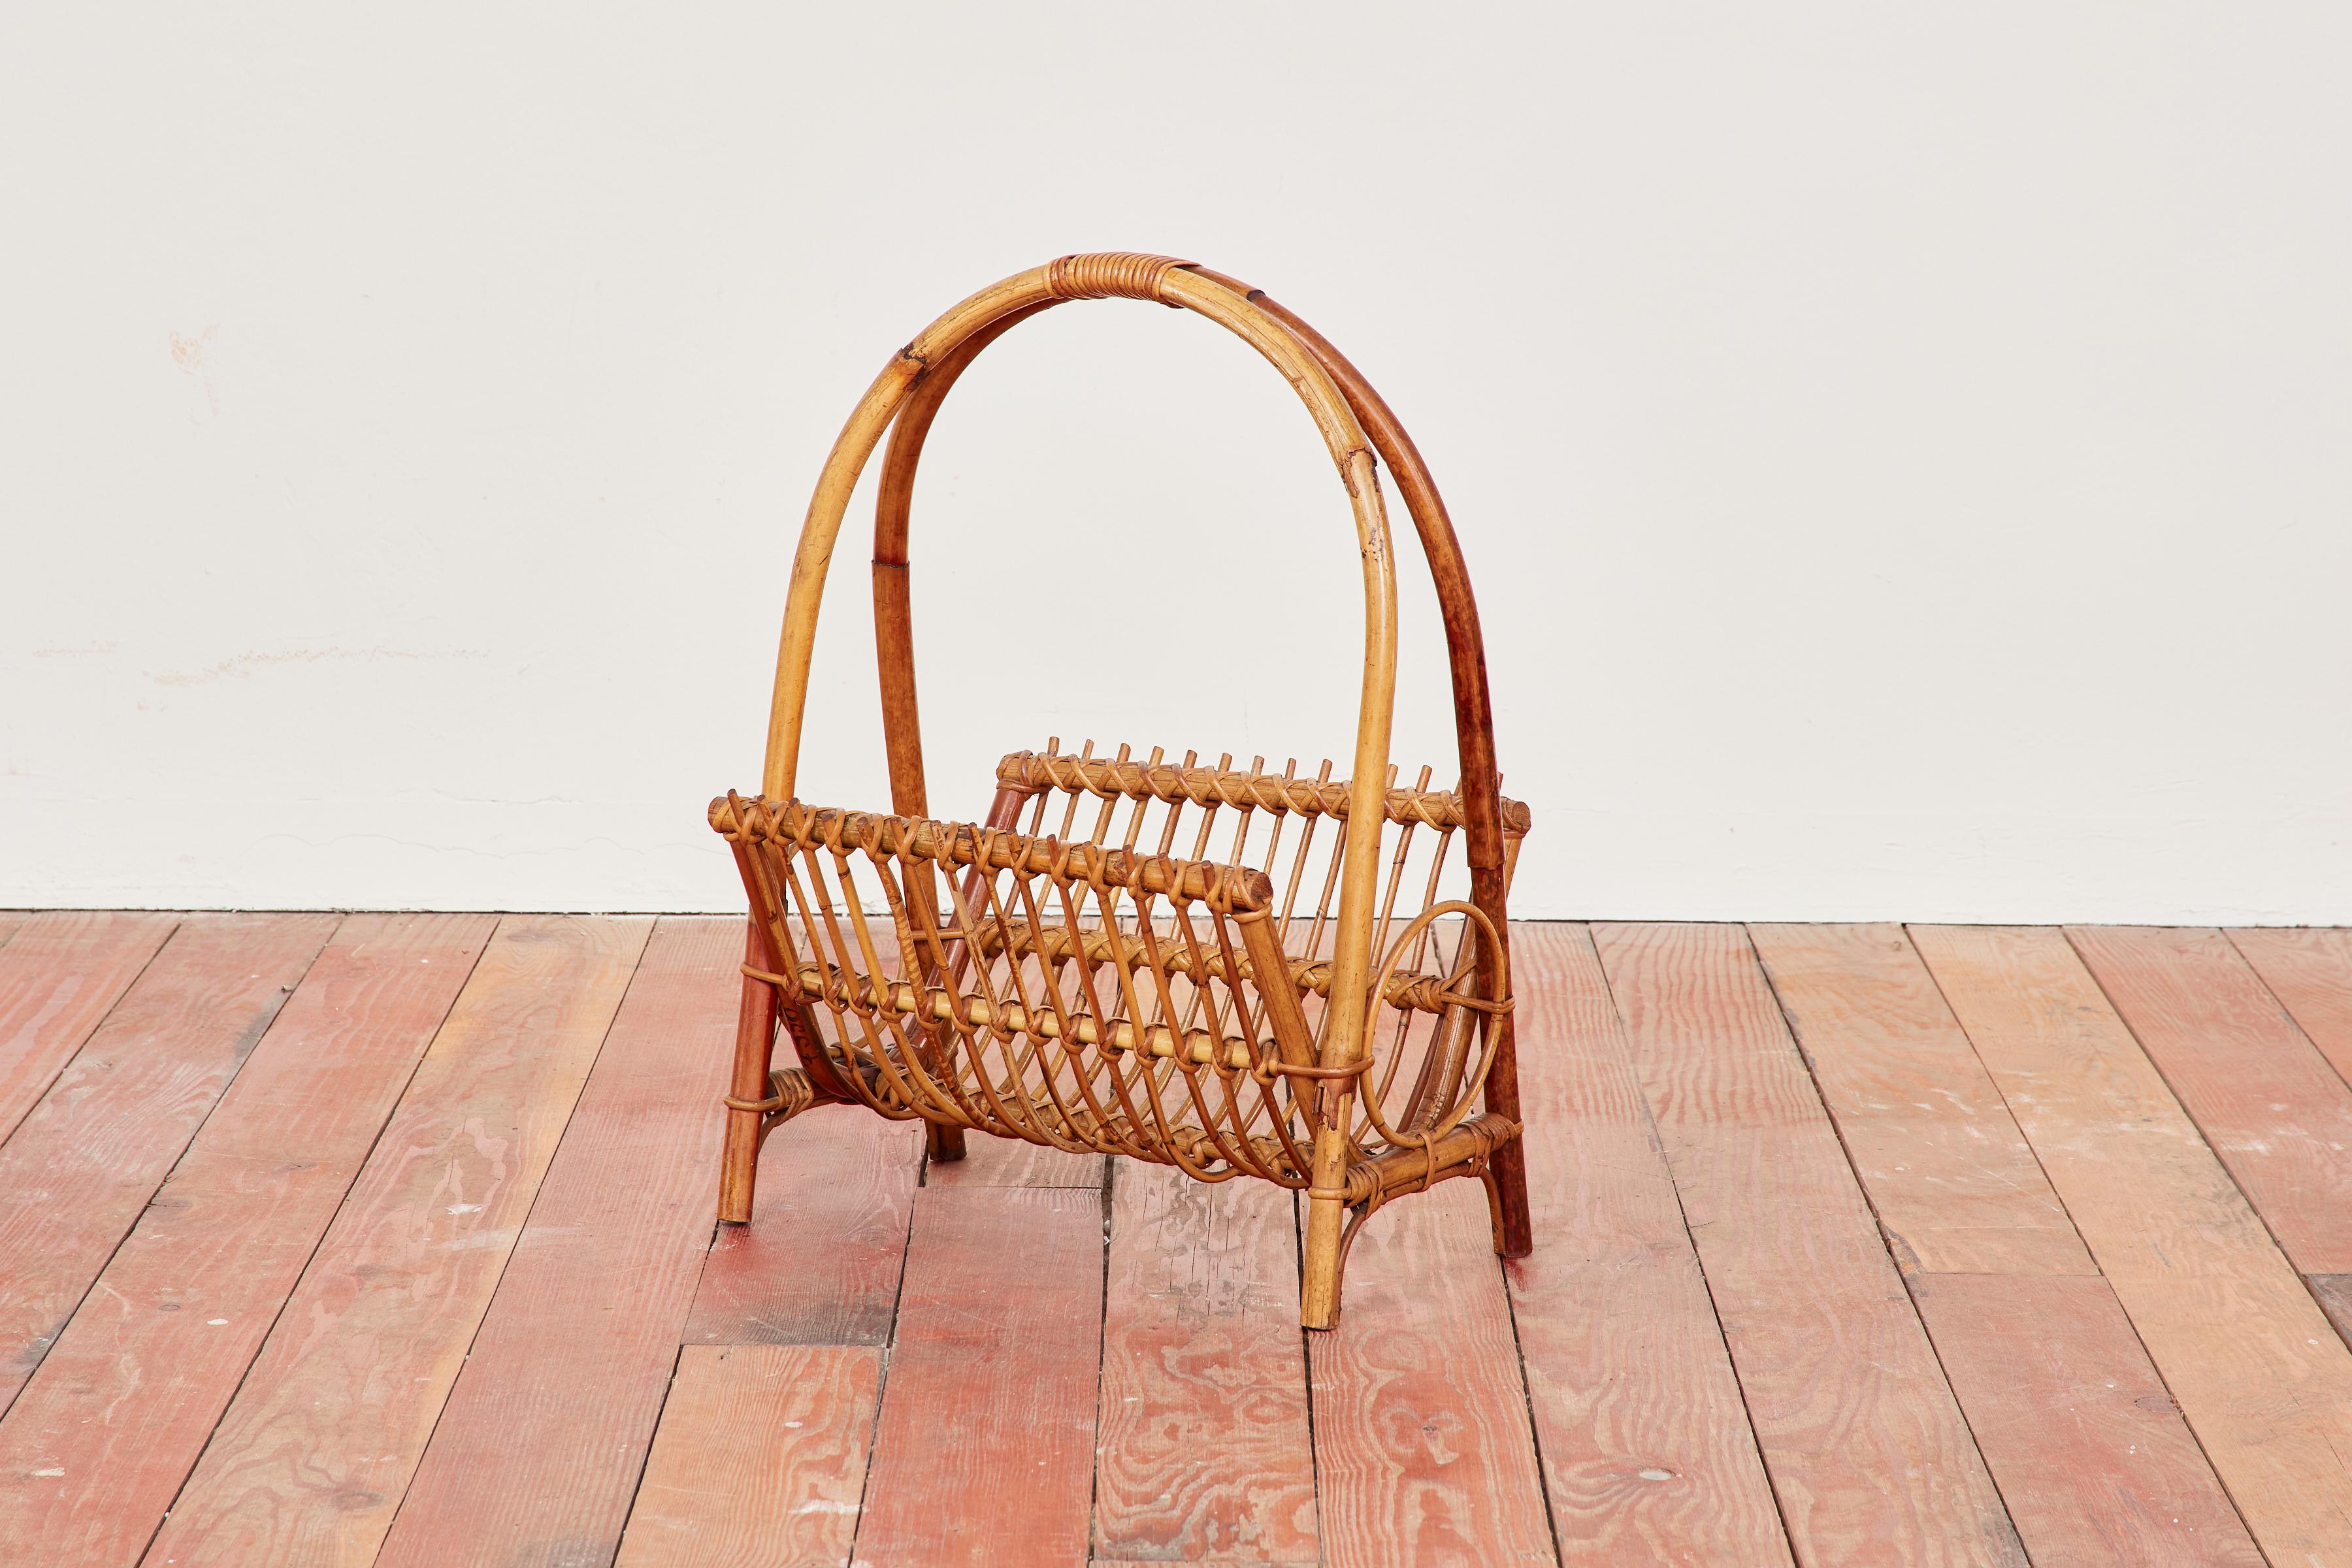 Sculptural bamboo magazine rack - Italy, 1950s
Great shape - nice large size and extremely well made.